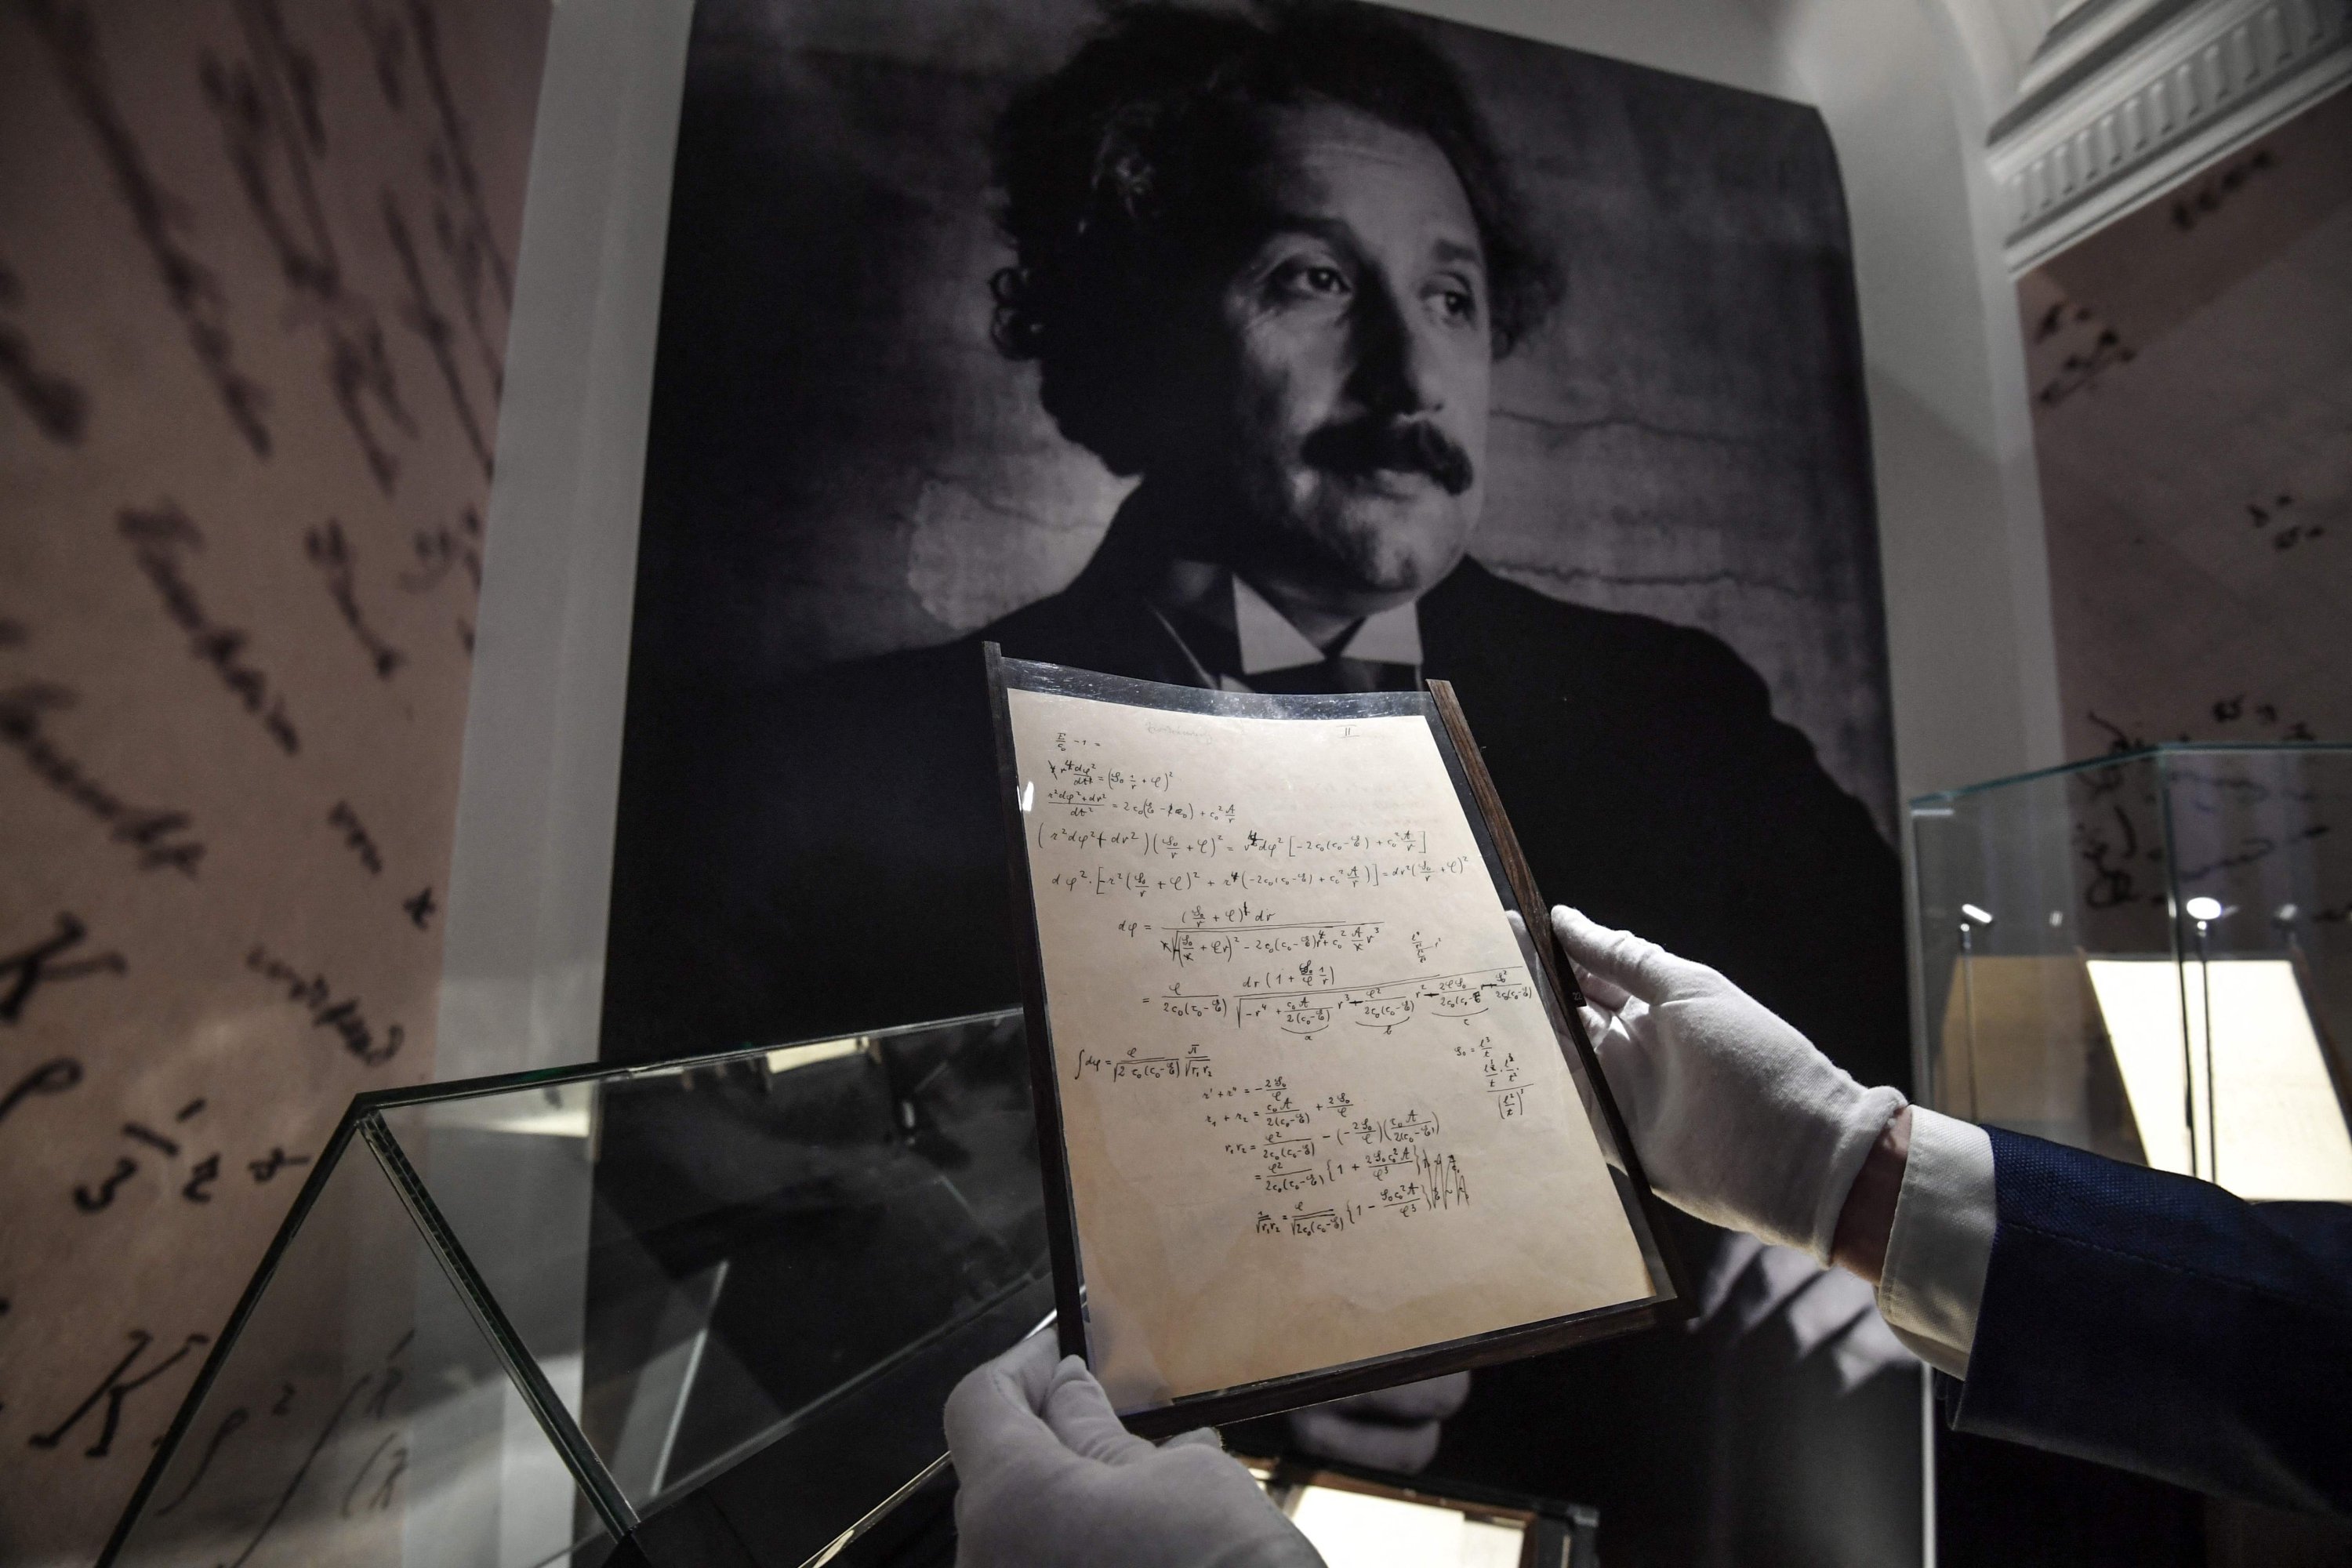 Pages of one of the preparatory manuscript to the theory of general relativity of Albert Einstein, during their presention a day before being auctionned at Christie's auction house in Paris, France, Nov. 22, 2021. (AFP Photo)